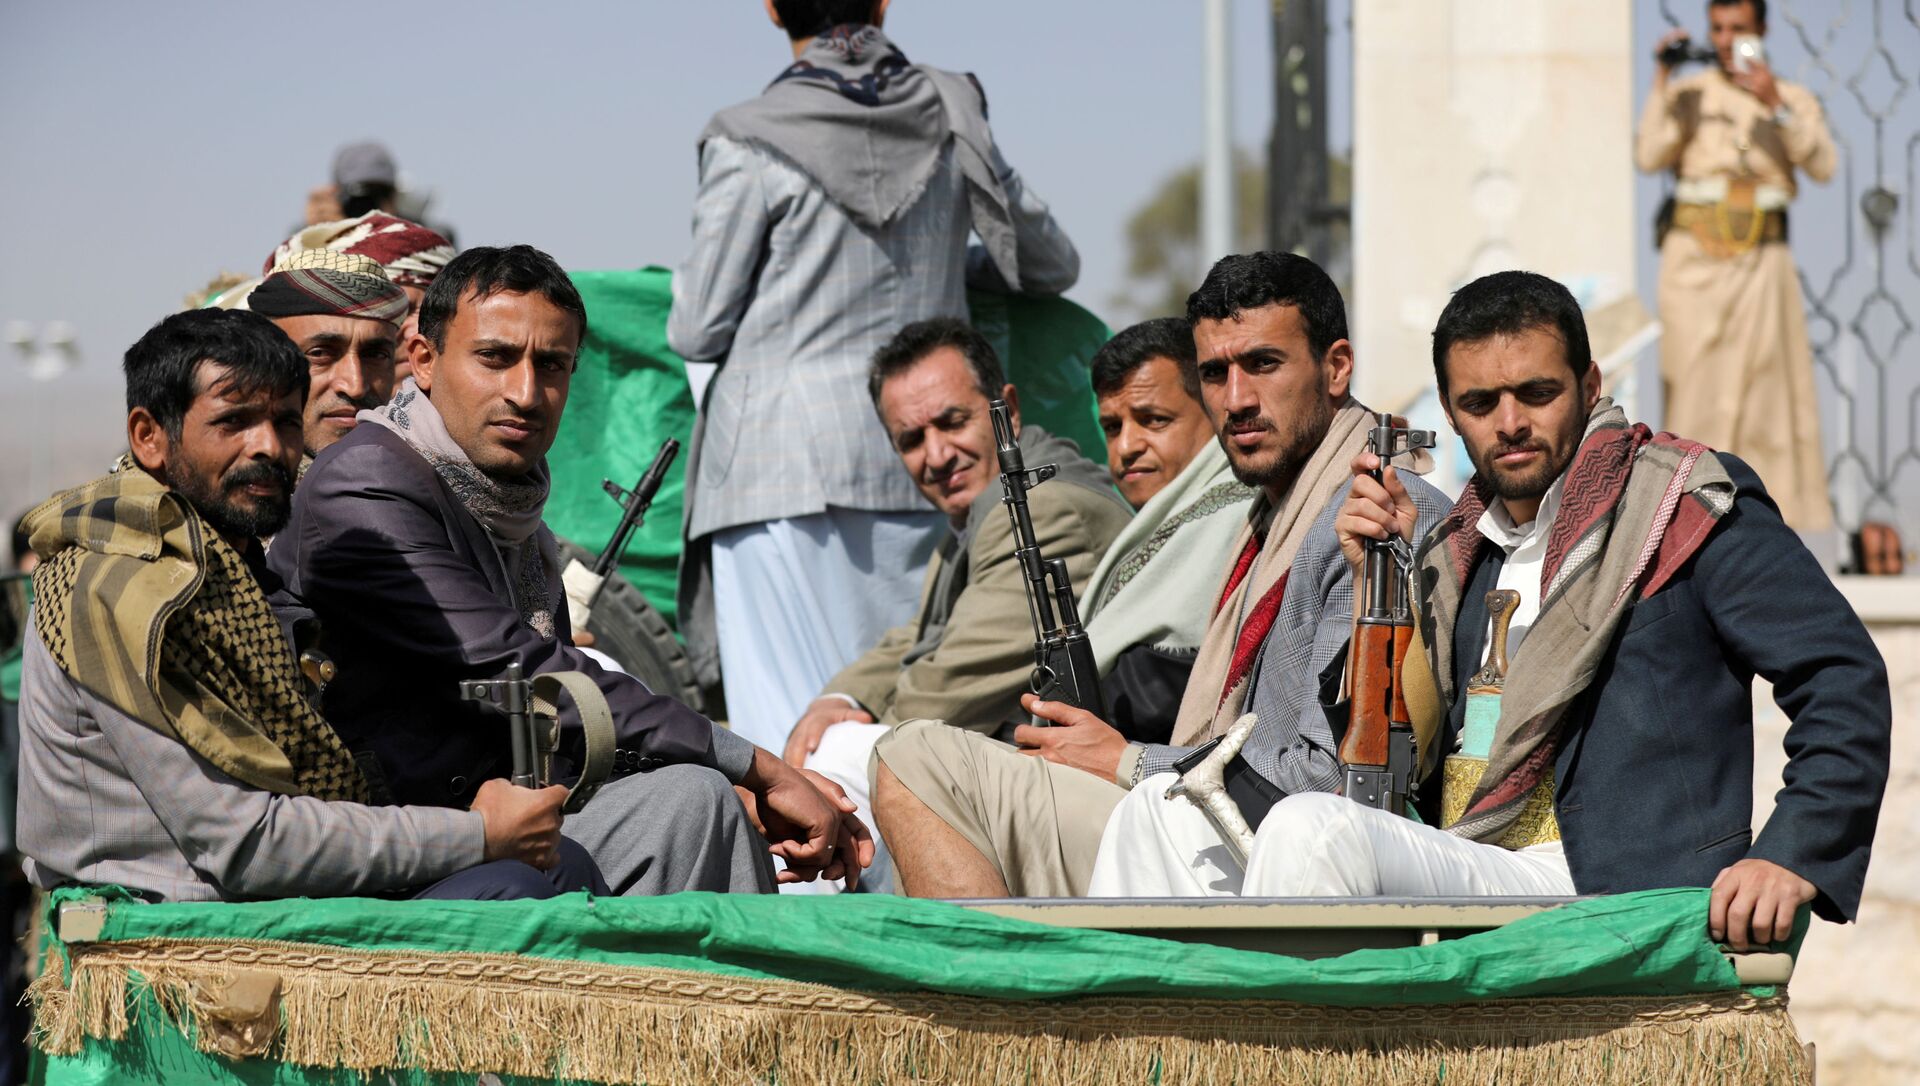 Armed Houthi followers ride on the back of a truck after participating in a funeral of Houthi fighters killed in recent fighting against government forces in Yemen's oil-rich province of Marib, in Sanaa, Yemen February 20, 2021.  - Sputnik International, 1920, 18.06.2021